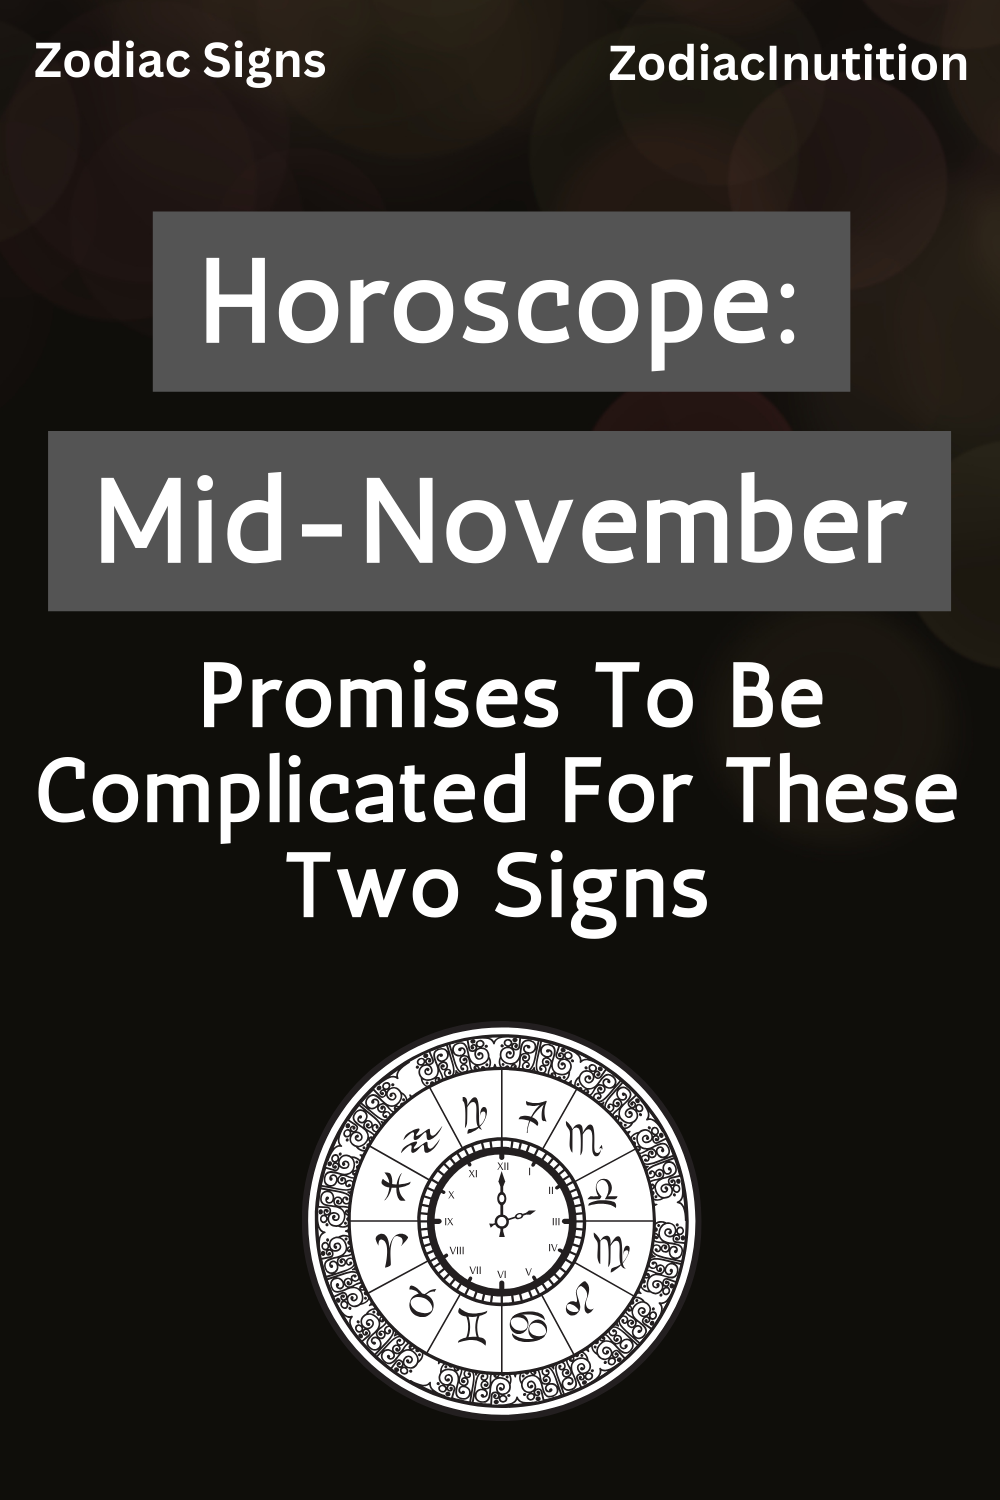 Horoscope: Mid-November Promises To Be Complicated For These Two Signs